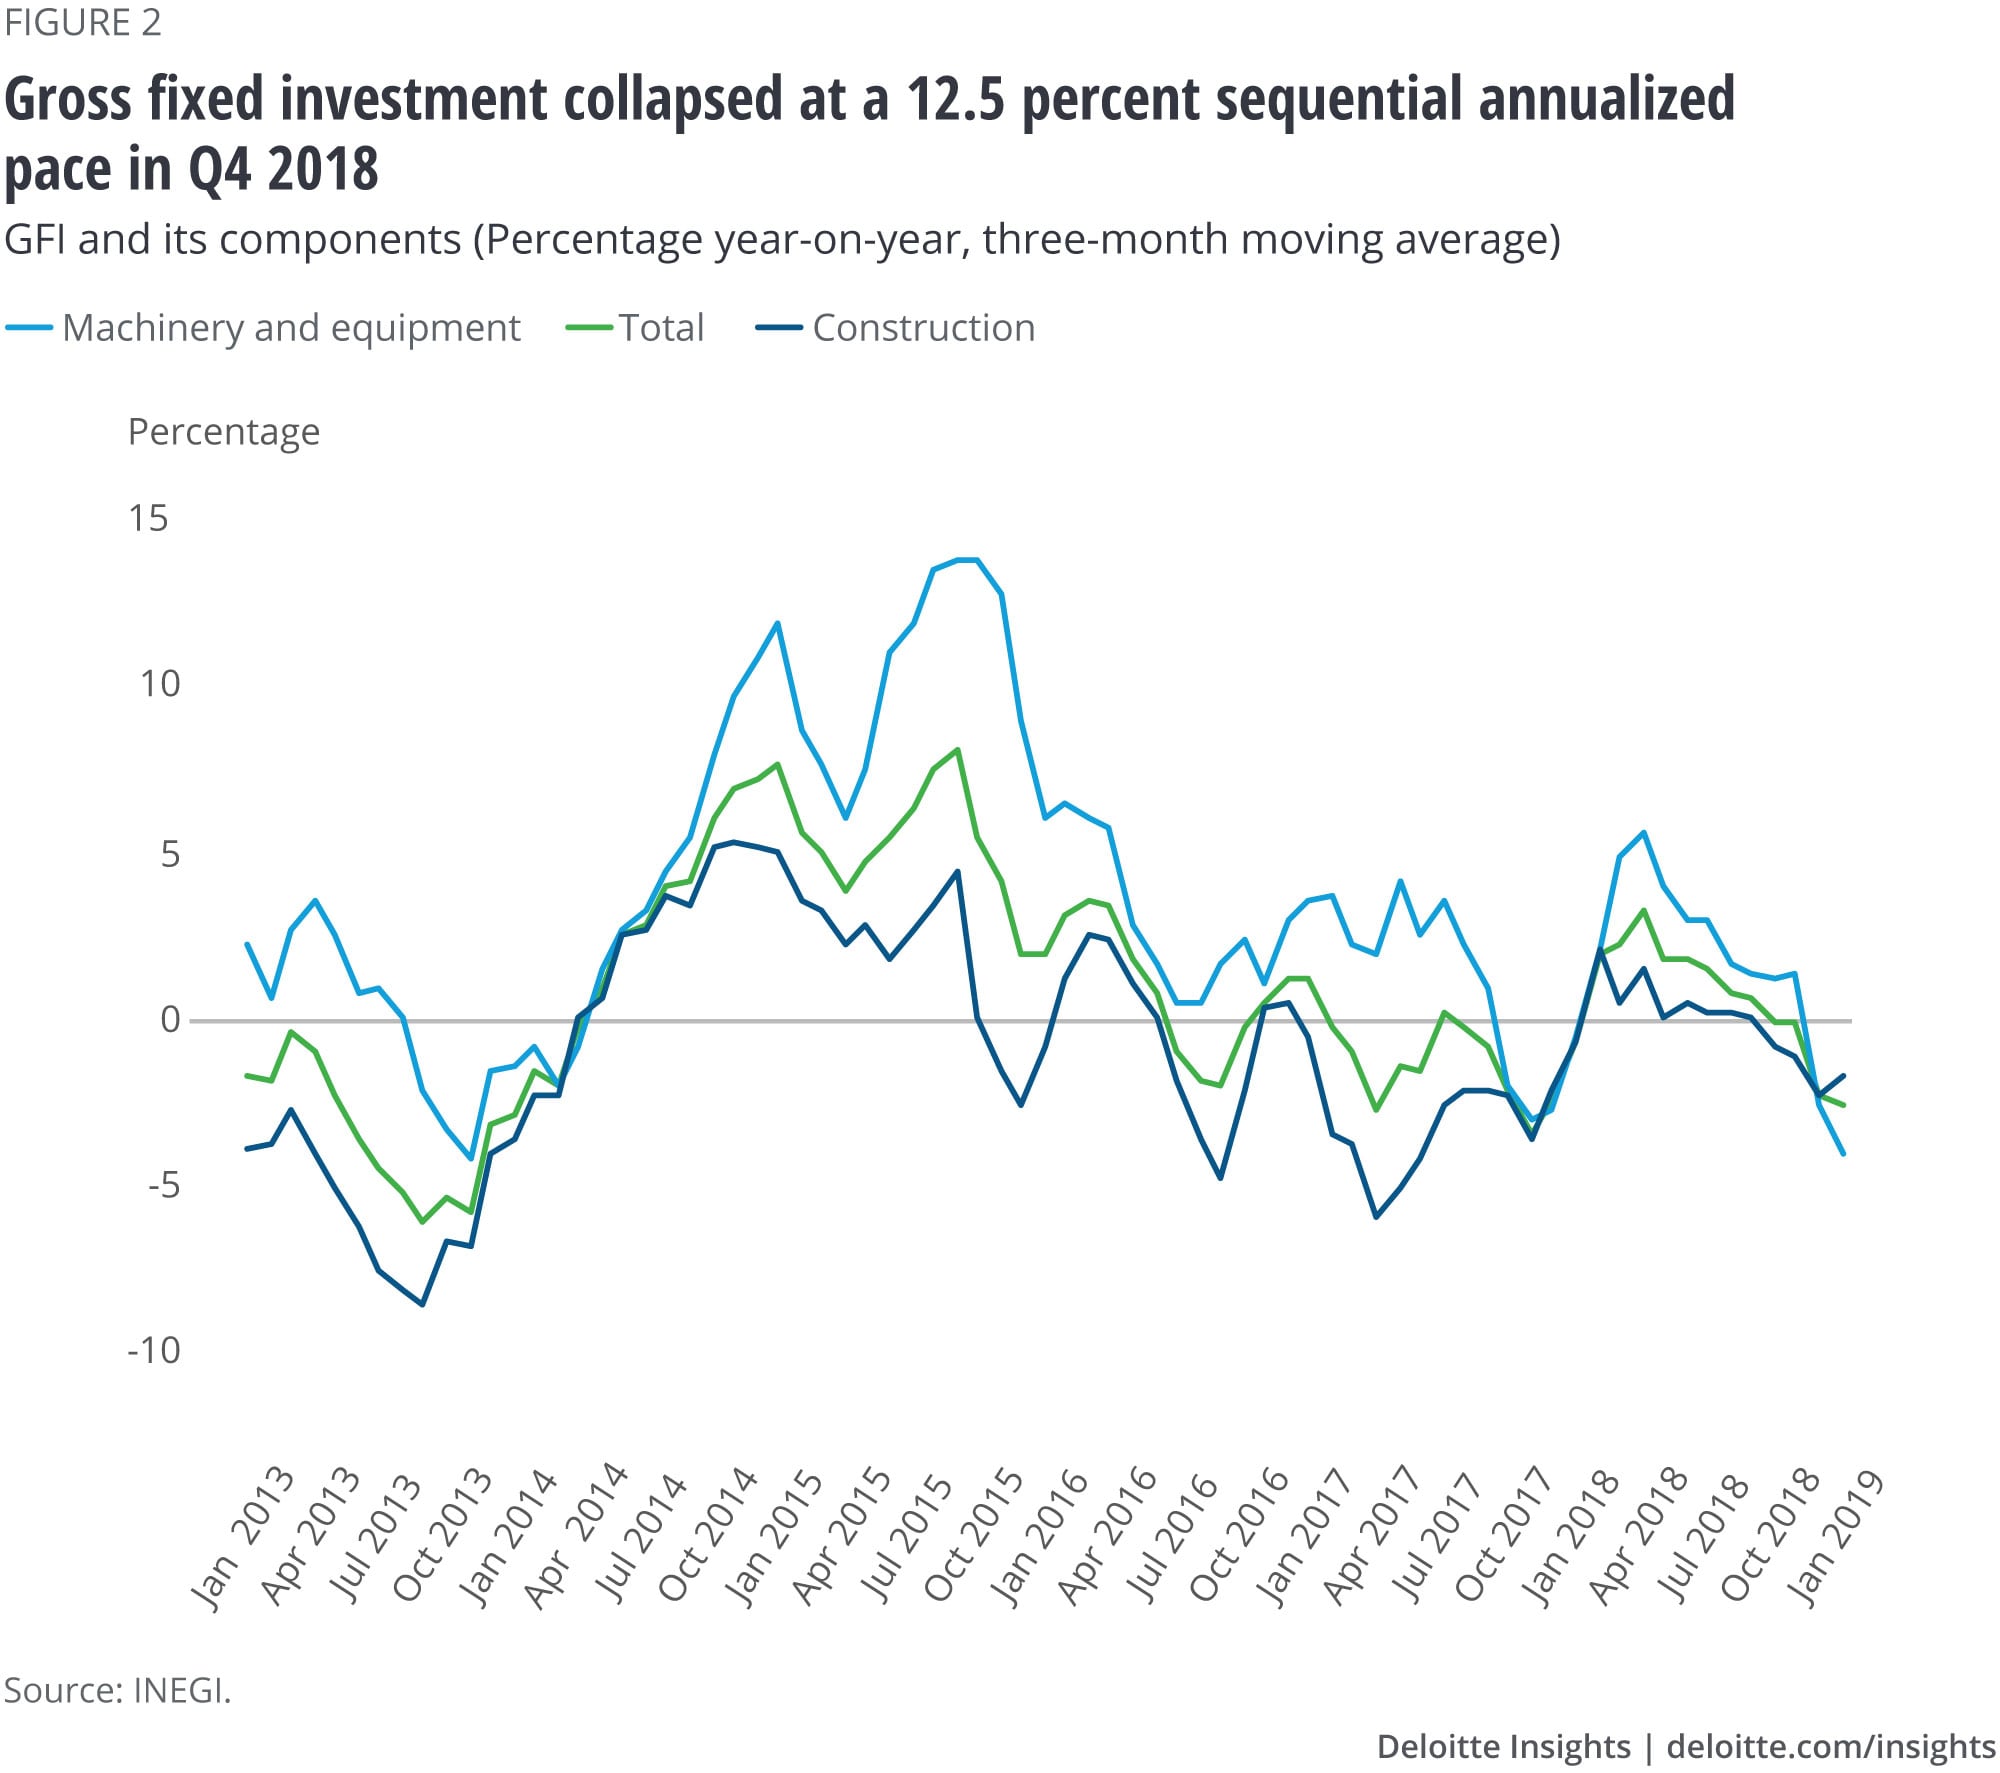 Gross fixed investment collapsed at a 12.5 percent sequential annualized pace in Q4 2018